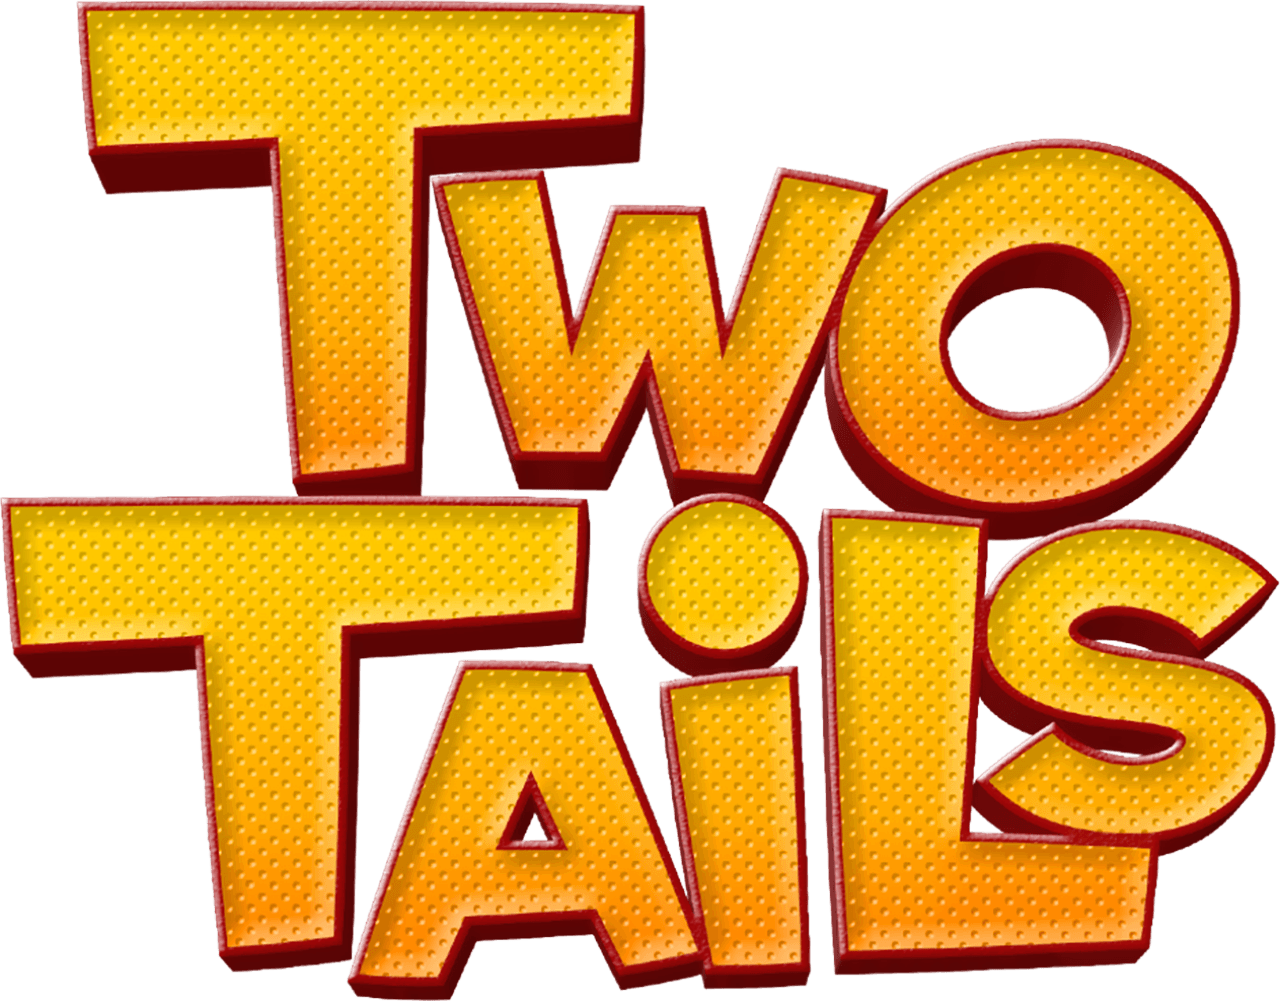 Two Tails logo